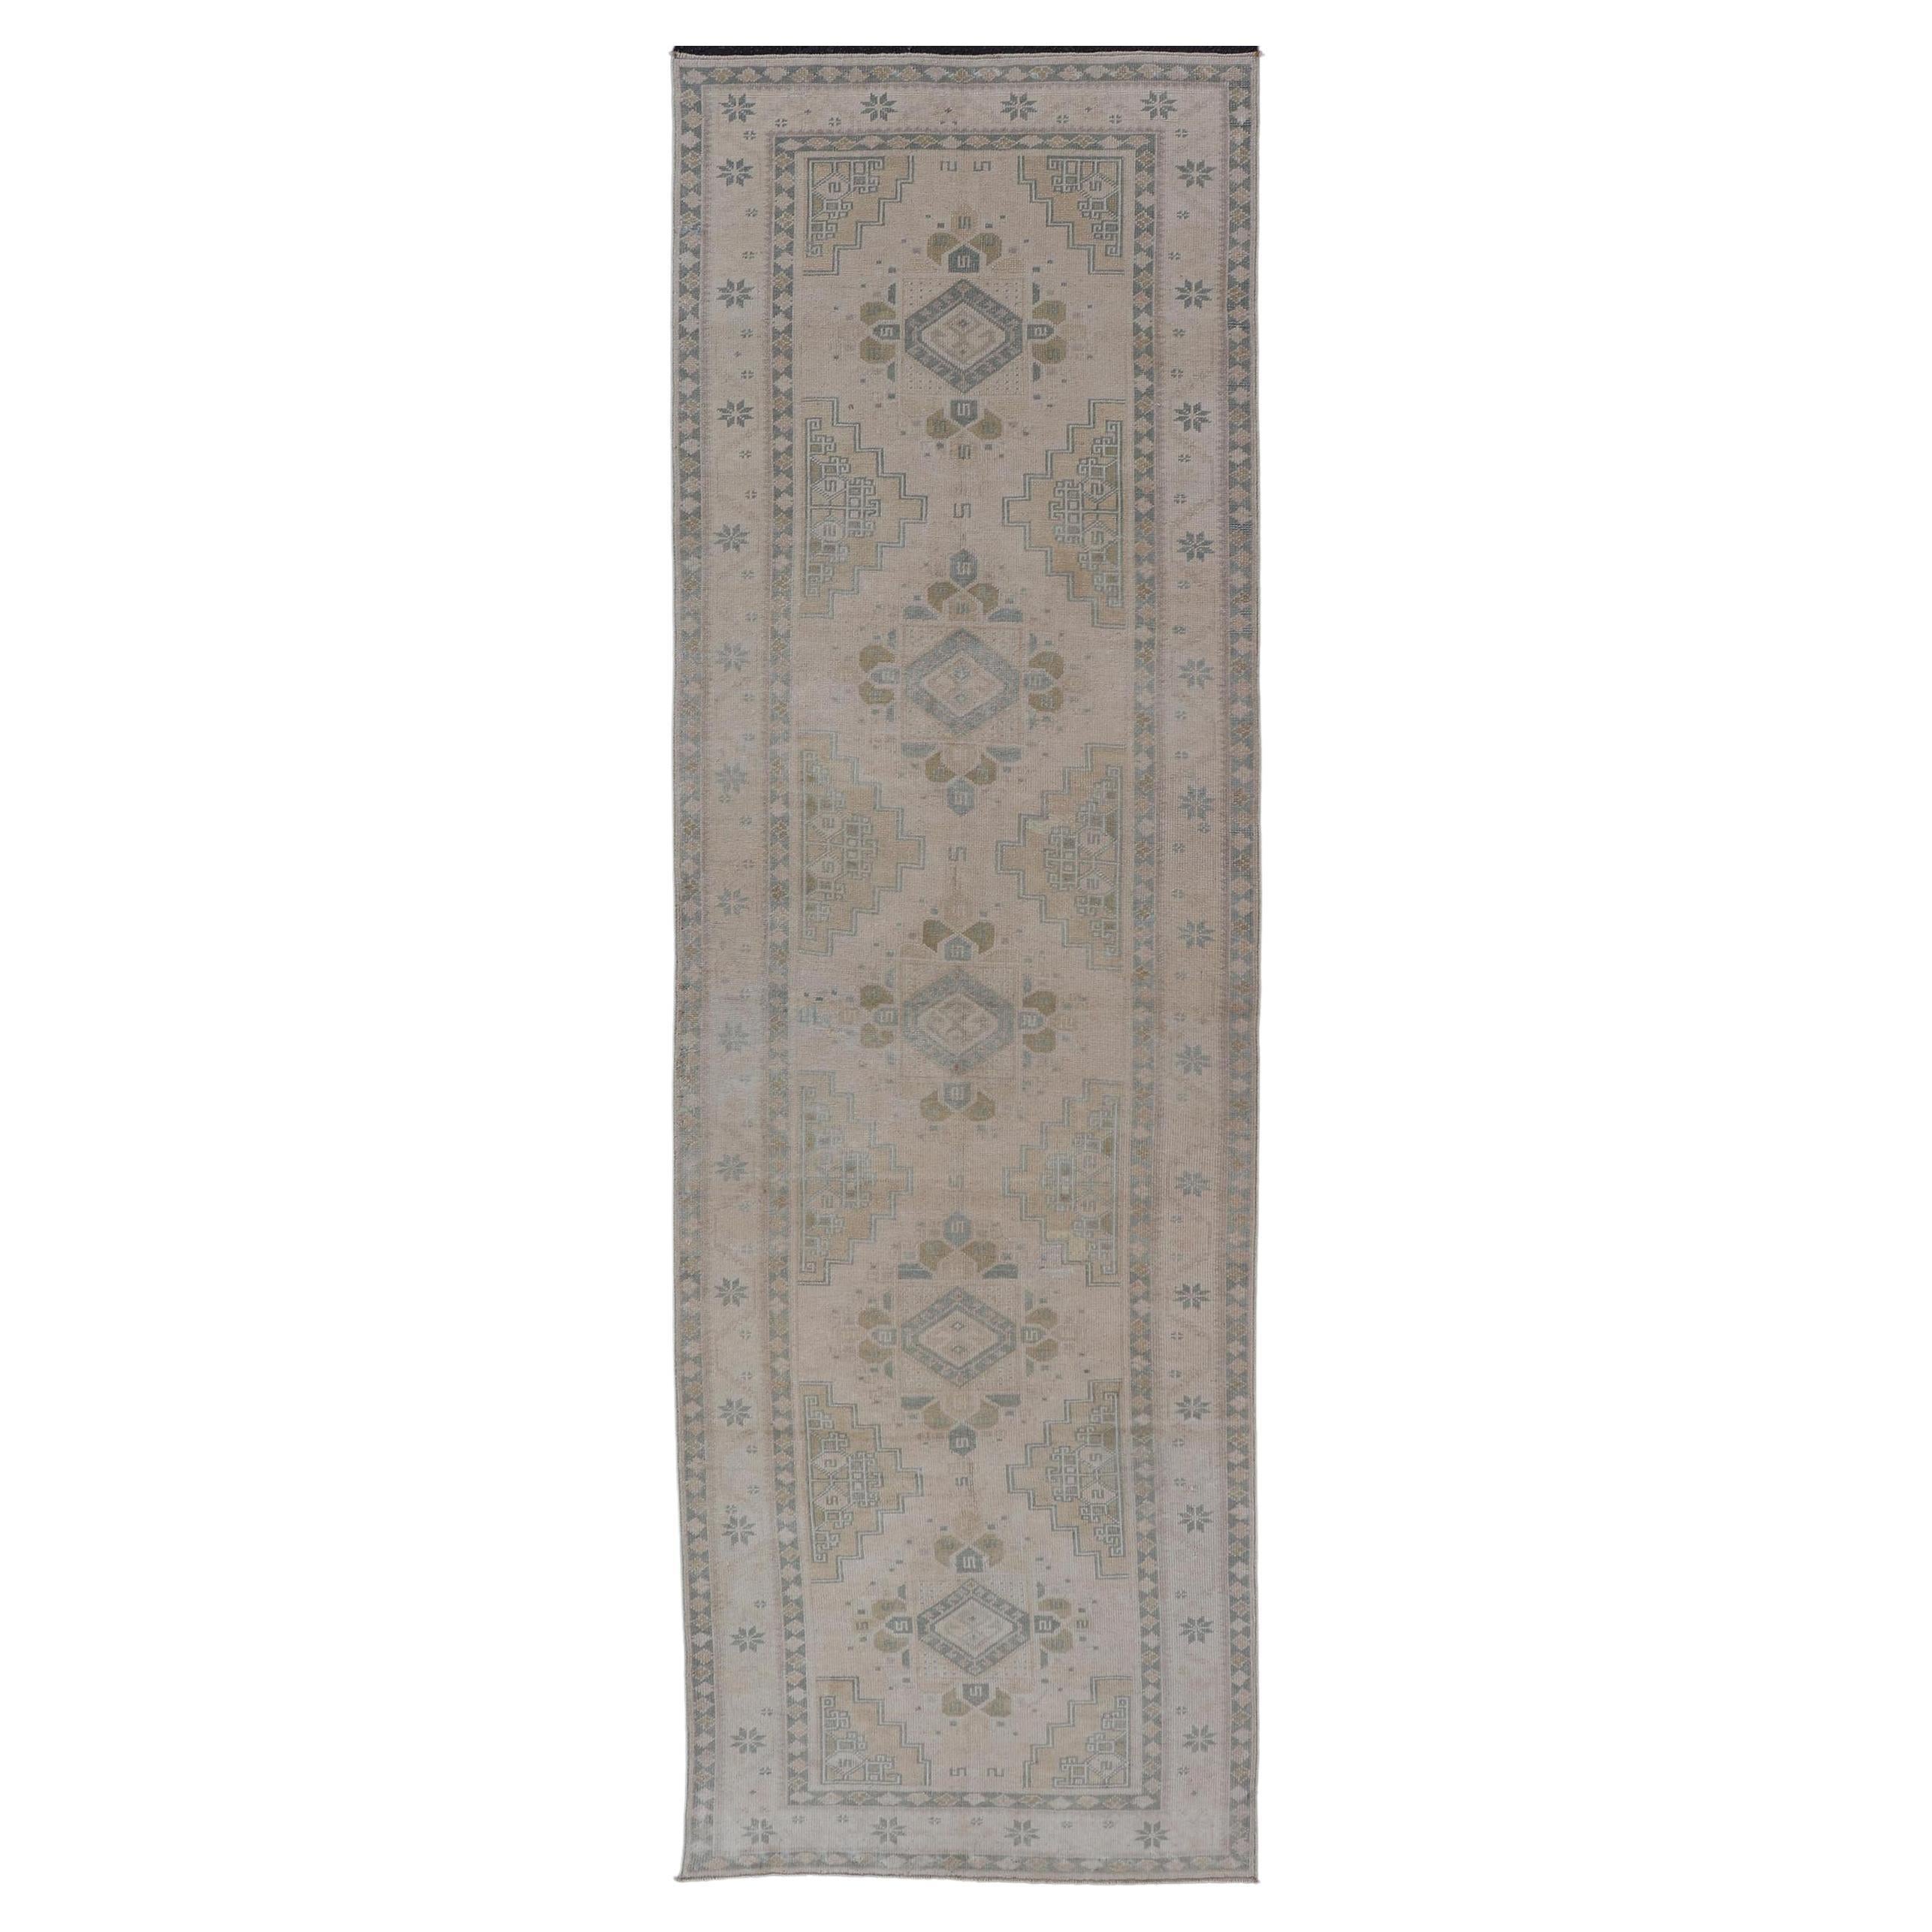 Vintage Turkish Oushak Runner in Neutral Tones, Taupe, Gray Green, Yellow